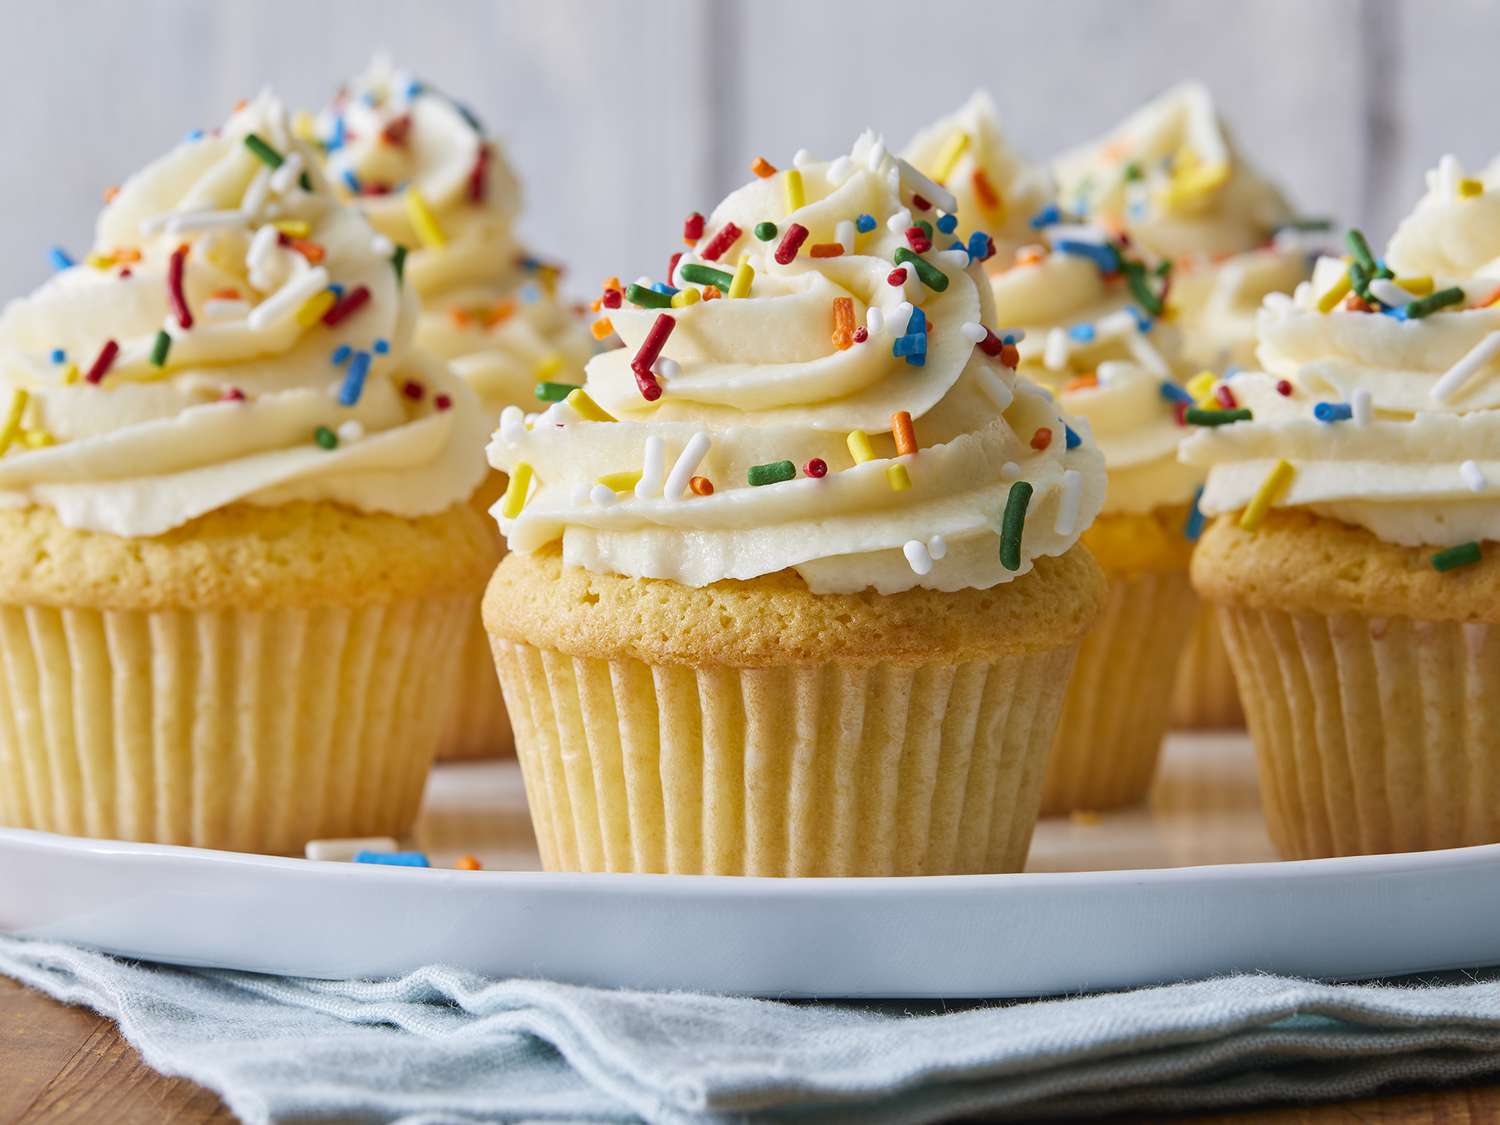 how-to-eat-a-cupcake-properly